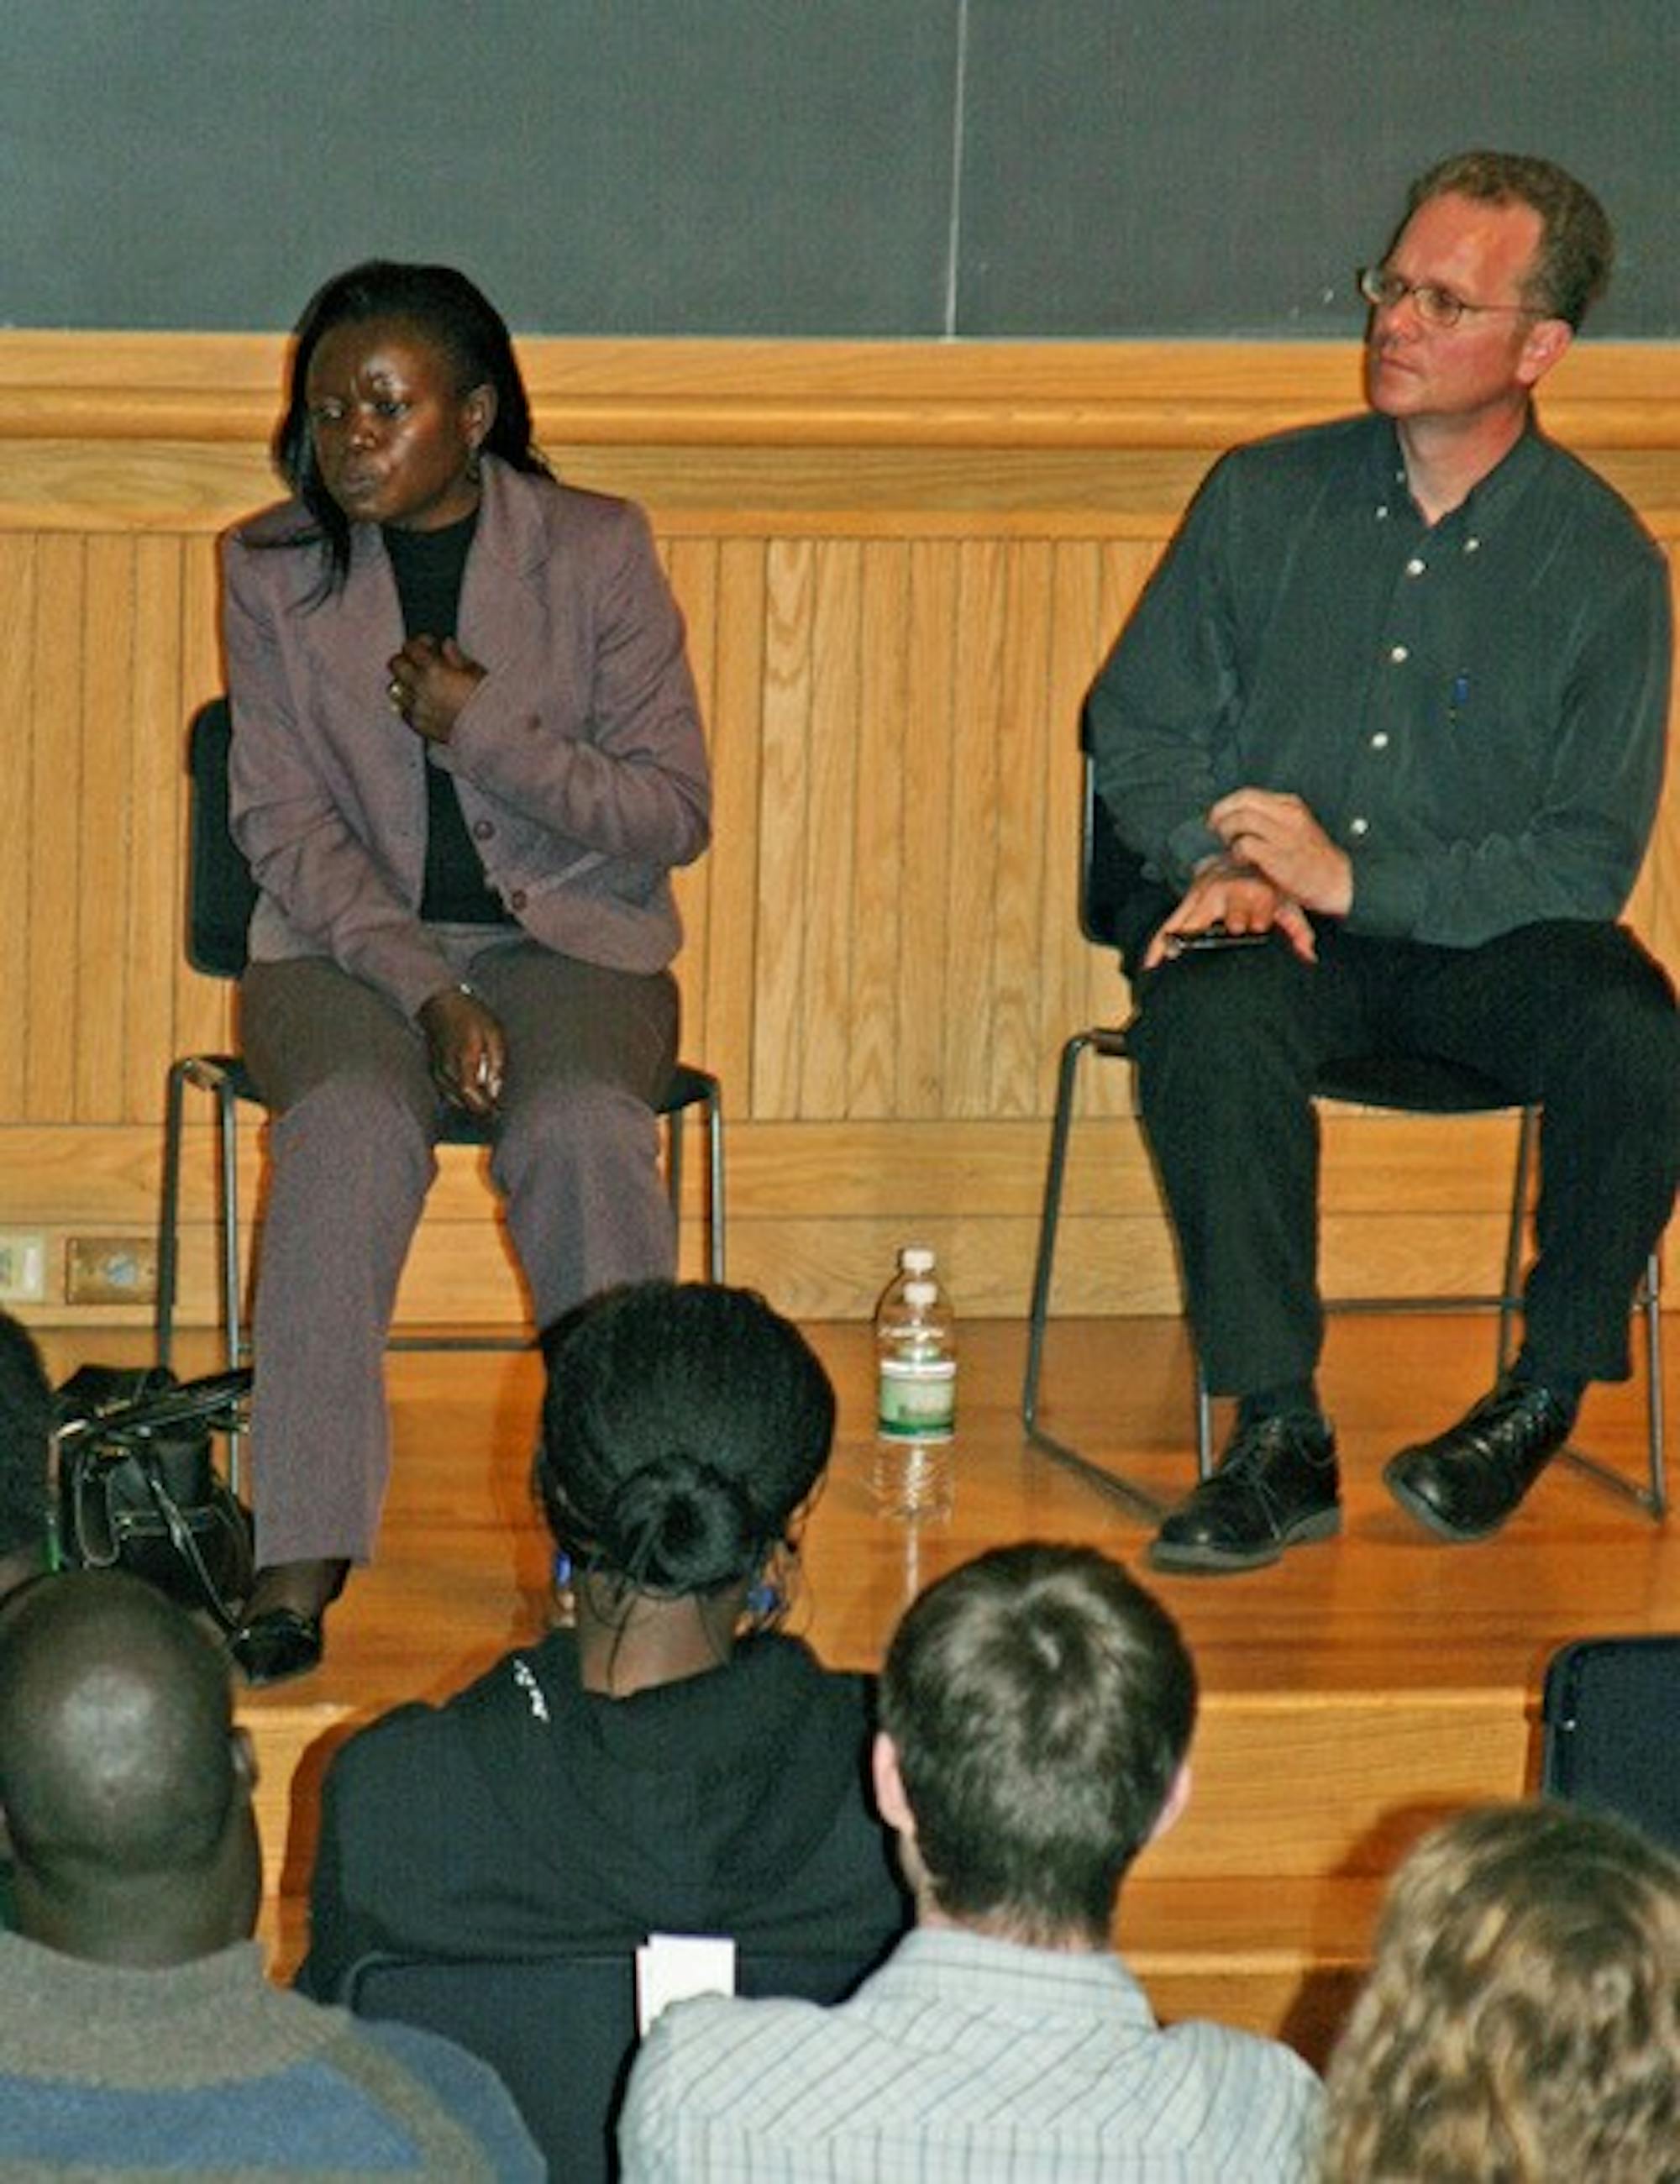 Ugandan AIDS activist Beatrice Were took questions from the audience after her speech Thursday evening in Rockefeller Forum.